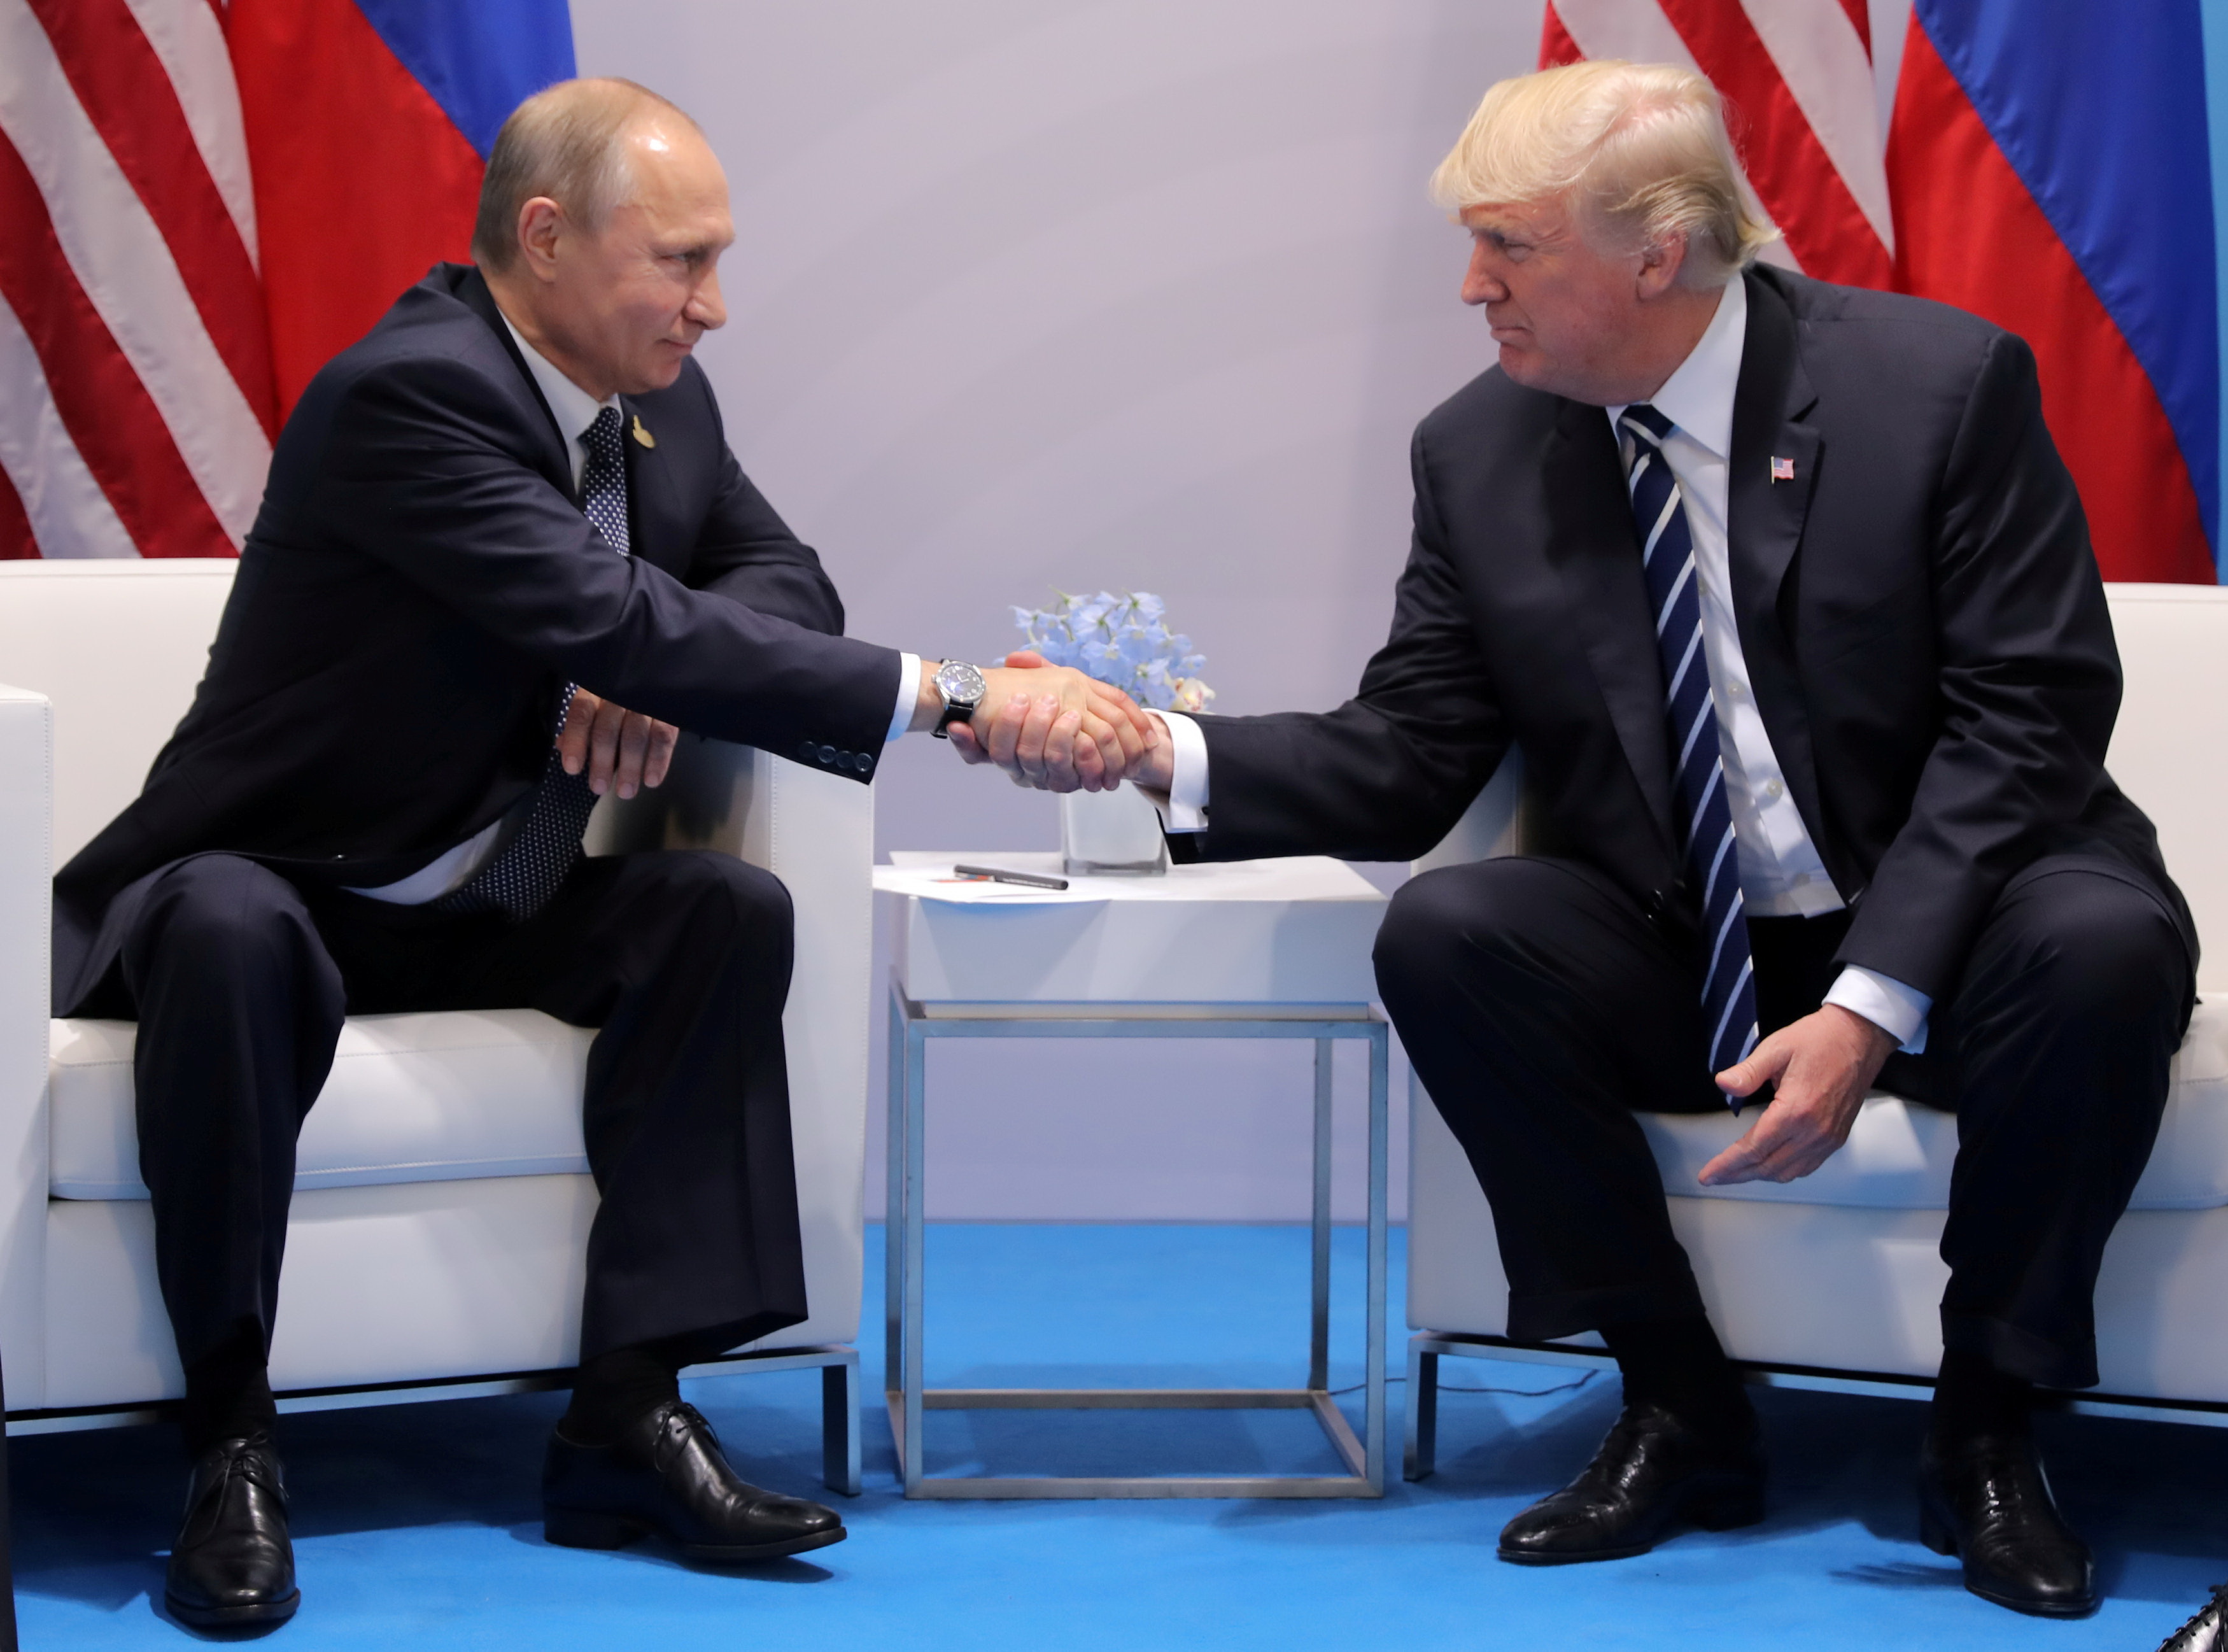 US and Russia engaged in a dangerous chess match